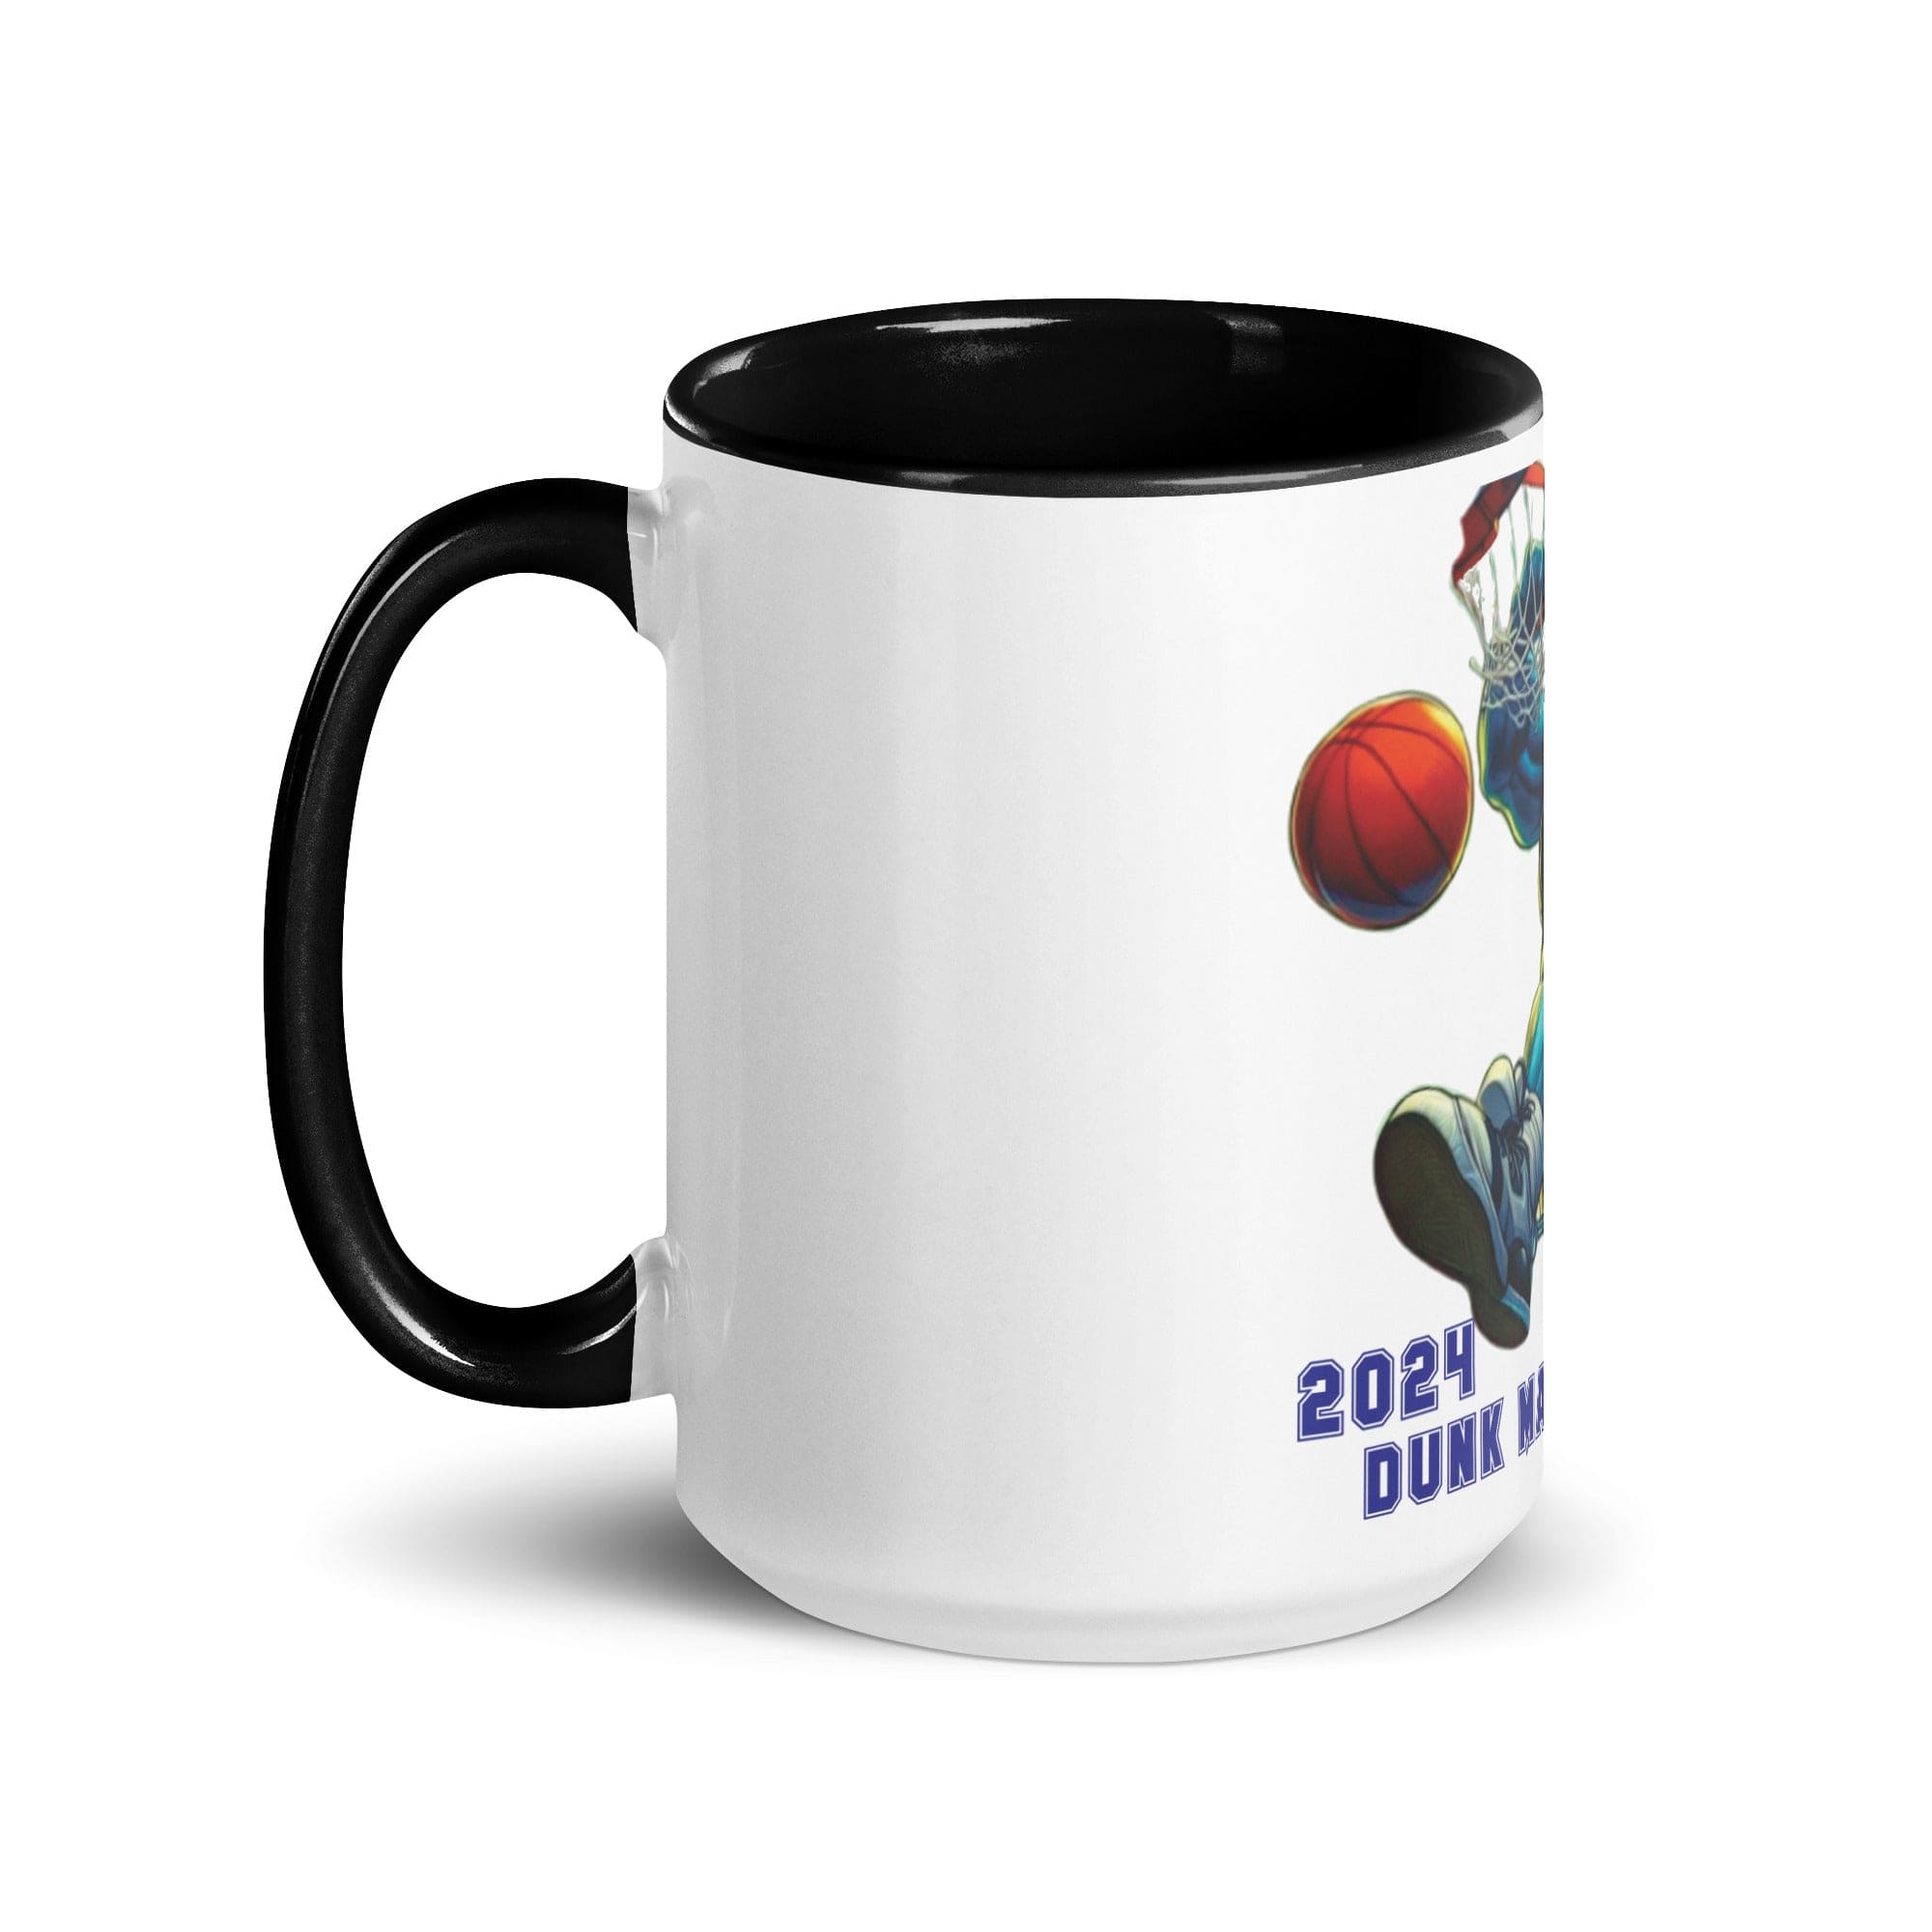 Start Your Day Right with Colorful Interior Mugs